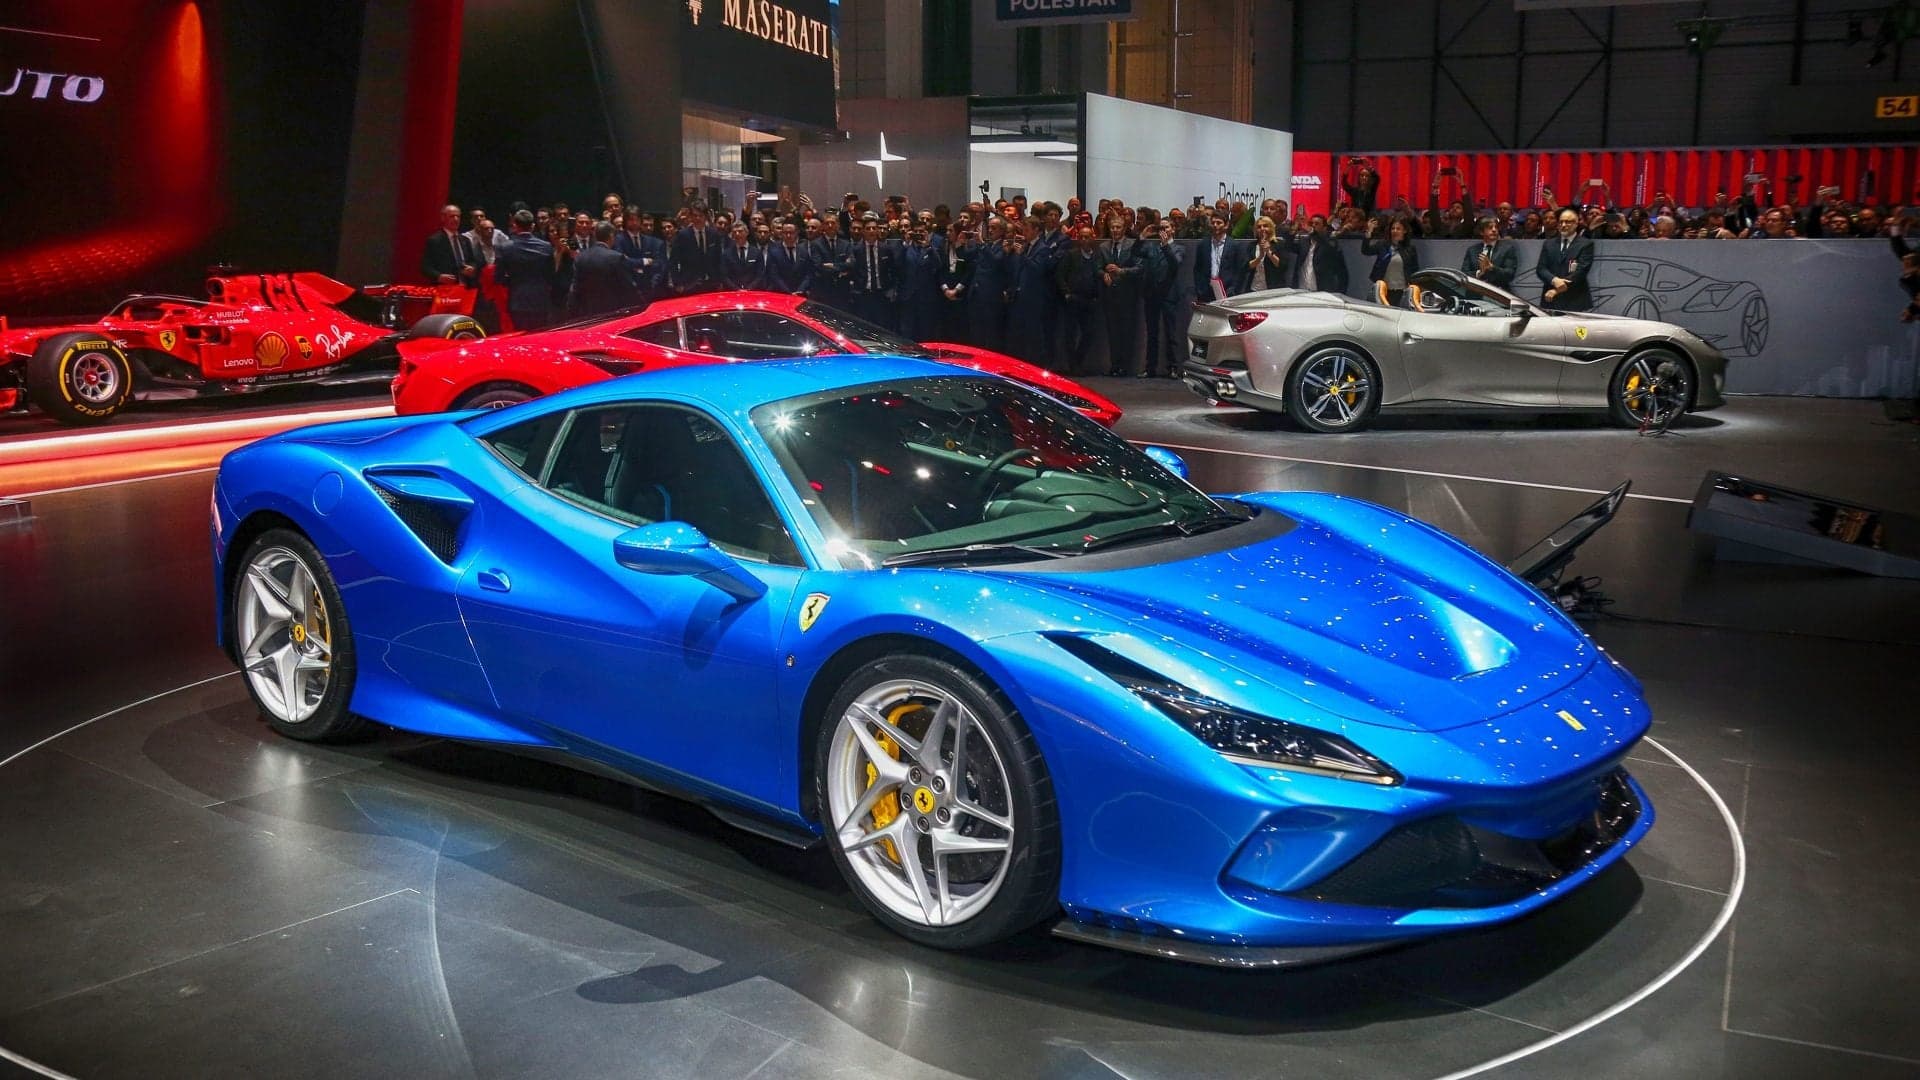 The 6 Hottest Cars of the 2019 Geneva Motor Show: Day 2